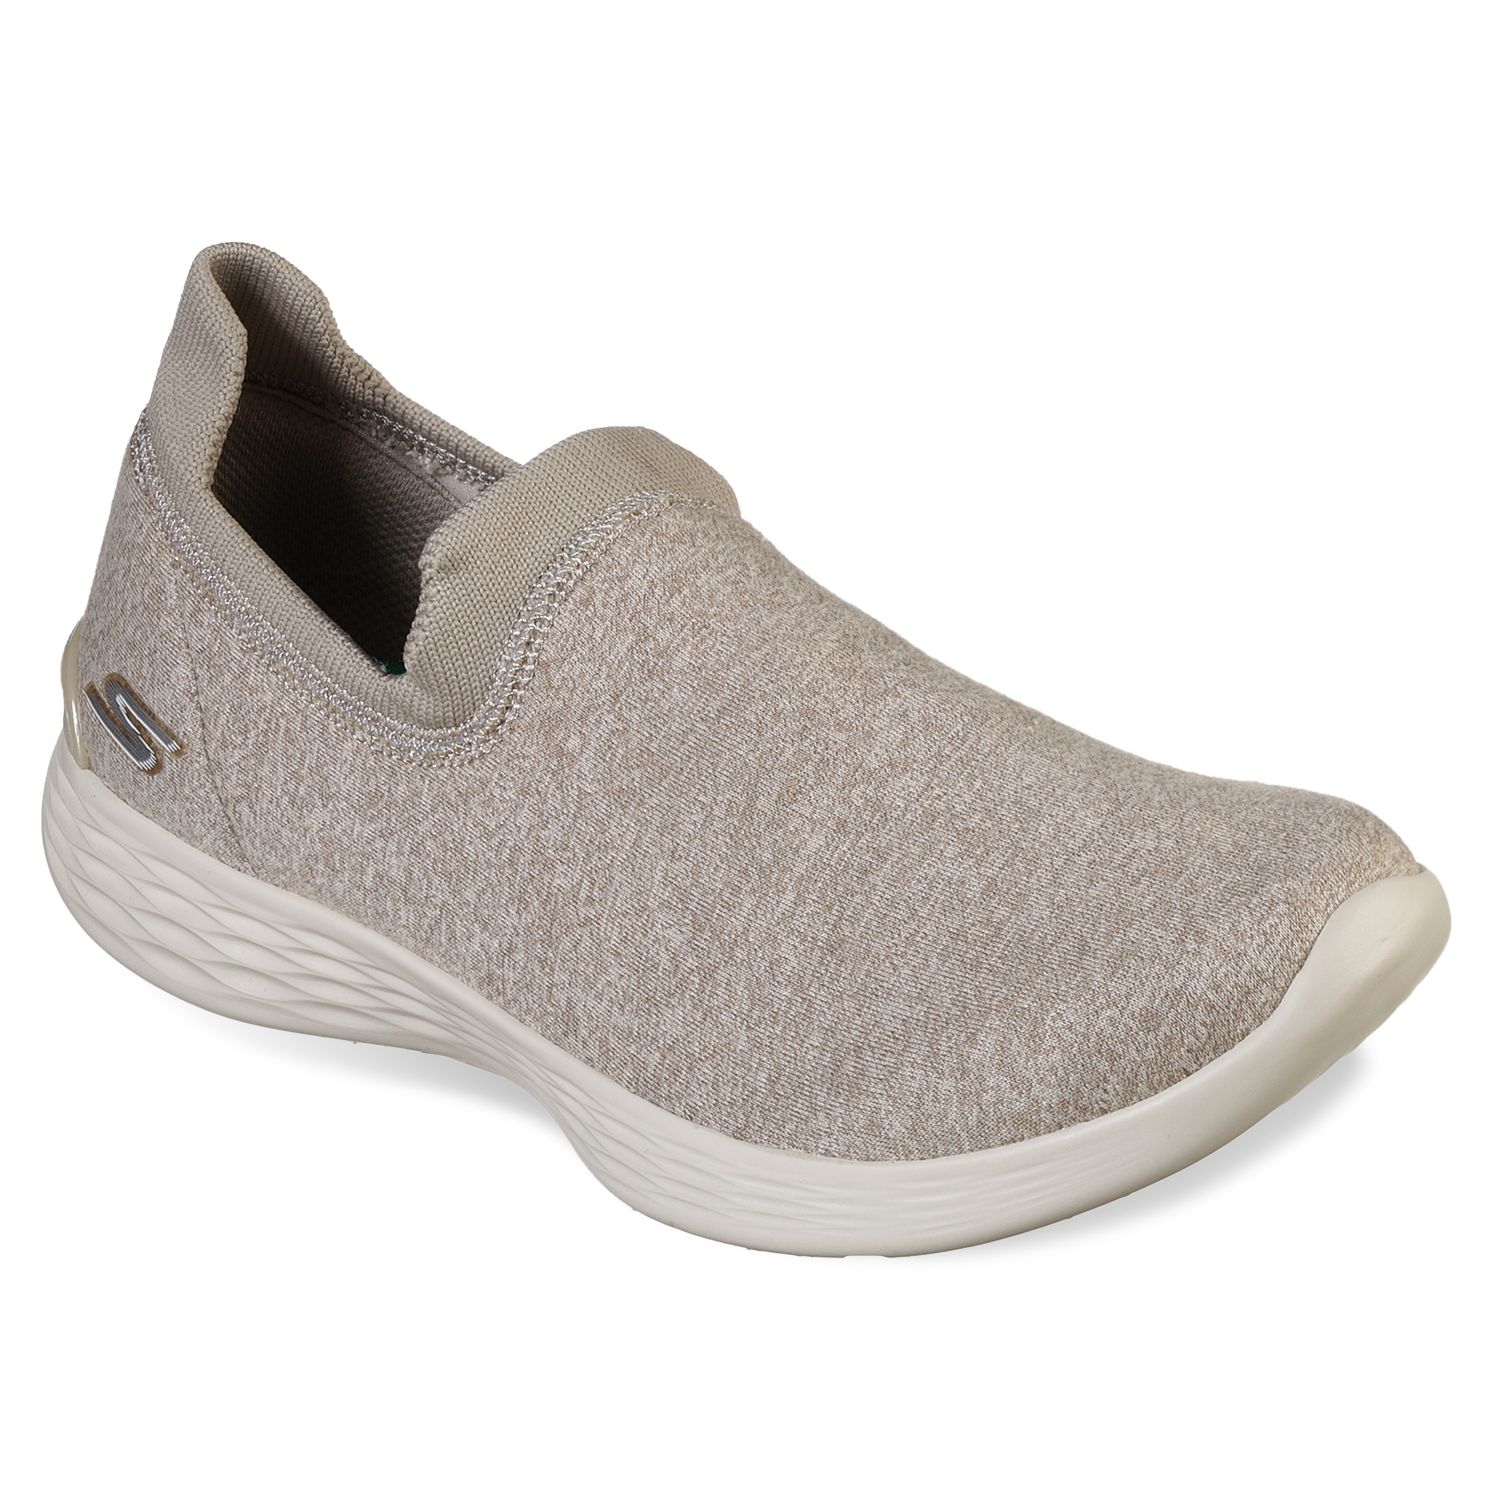 you by skechers slip on